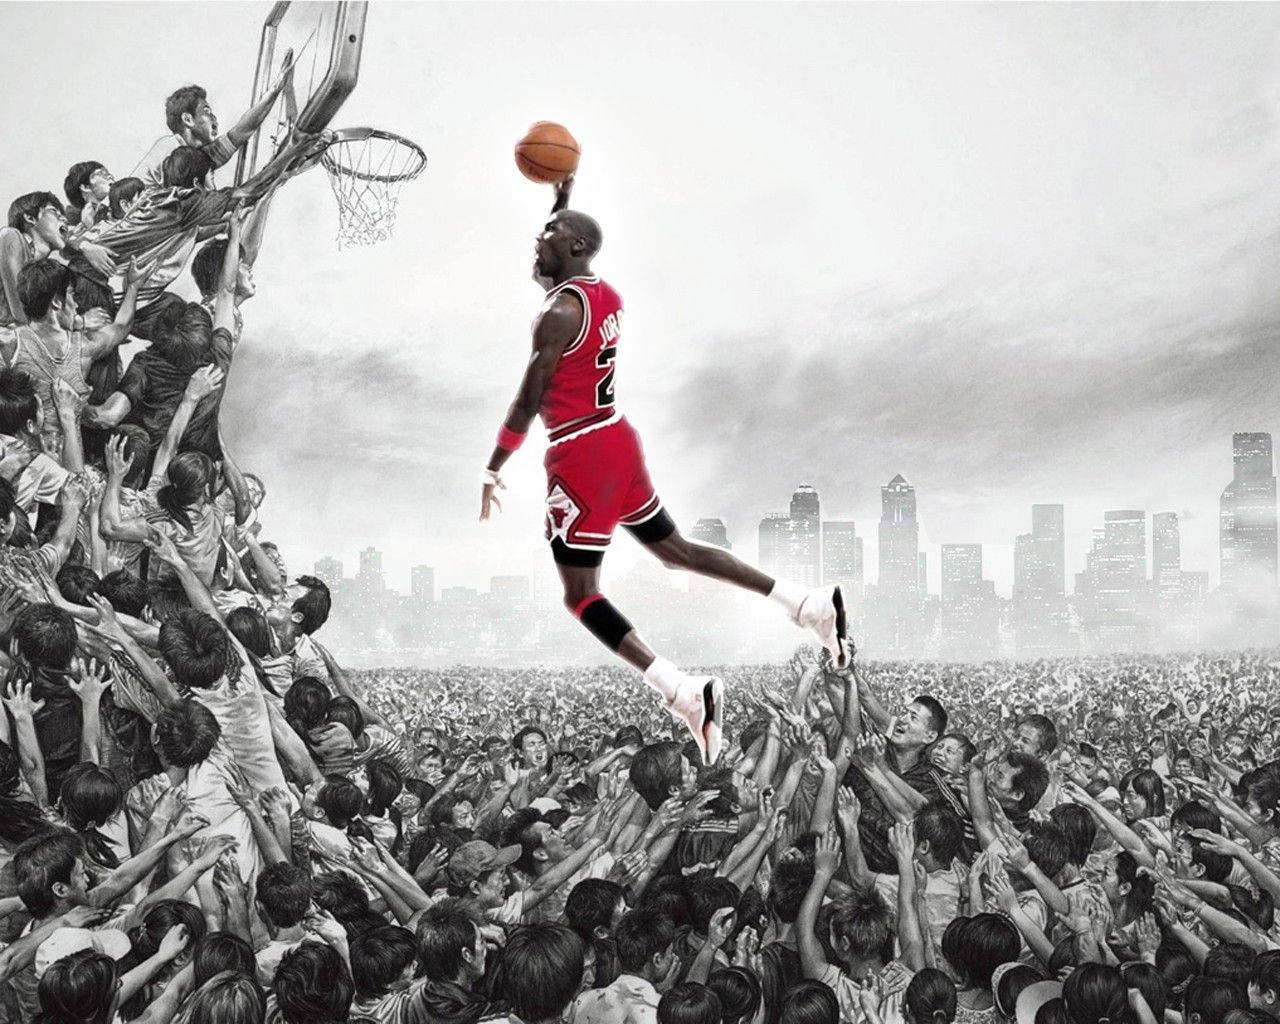 1280x1024 Download Cool Basketball Wallpaper Nba Gallery 1600×1200 Awesome Wallpaper